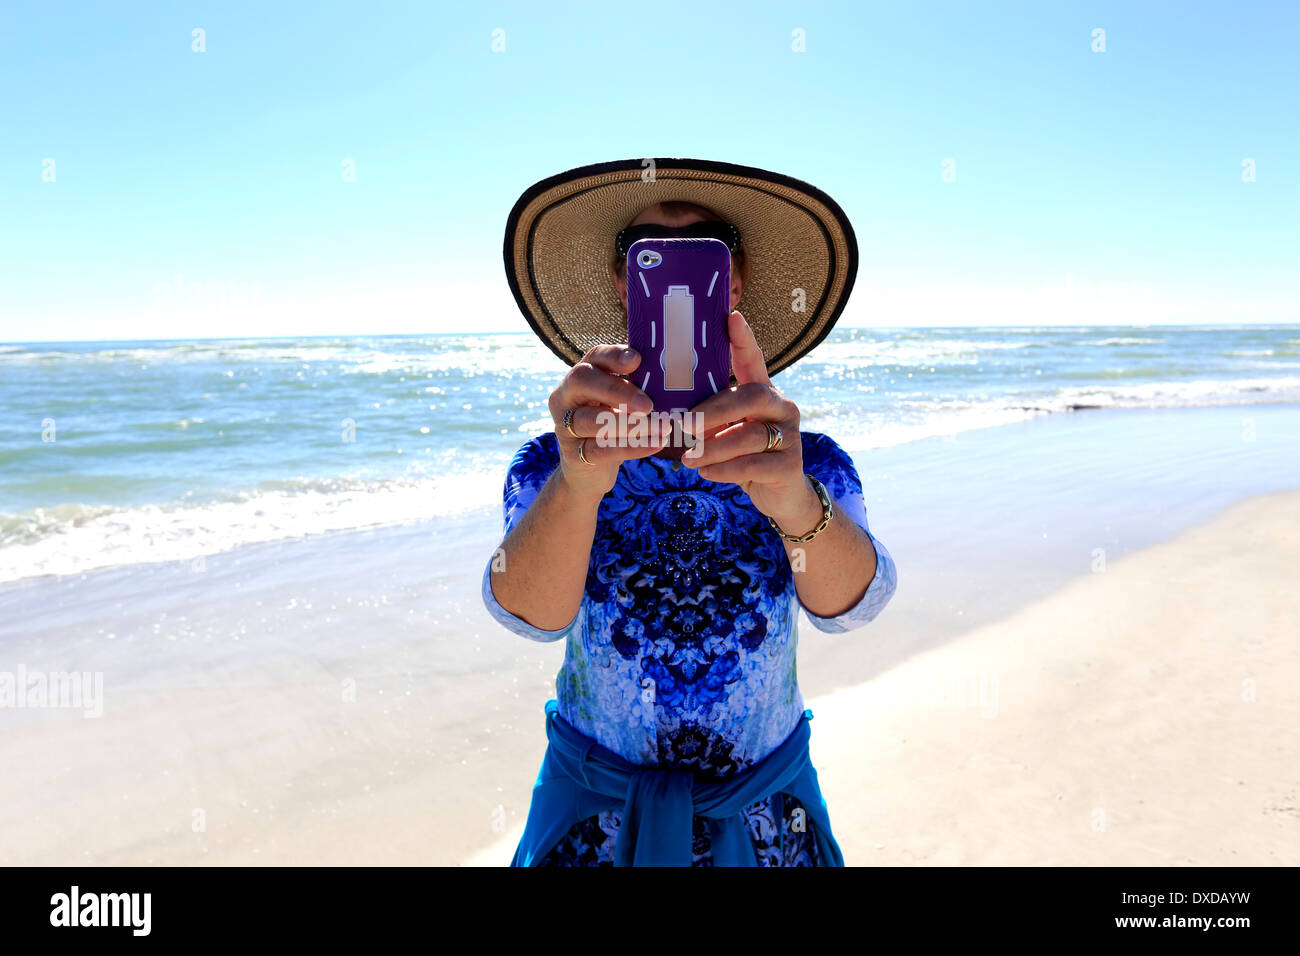 A woman taking pictures or photographs at a beach with an IPod or IPhone or camera phone Stock Photo